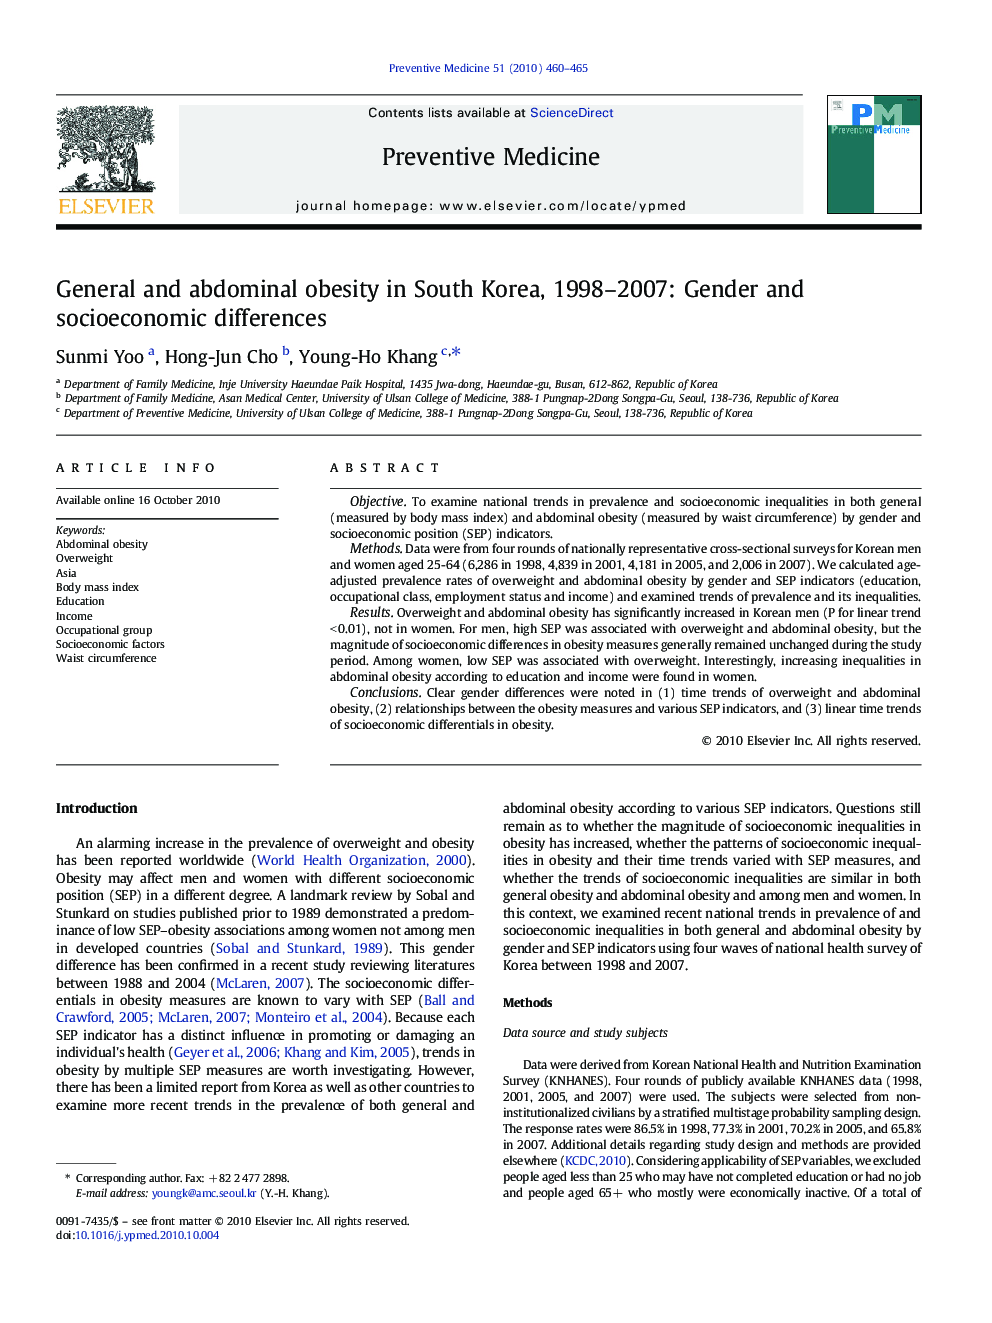 General and abdominal obesity in South Korea, 1998–2007: Gender and socioeconomic differences